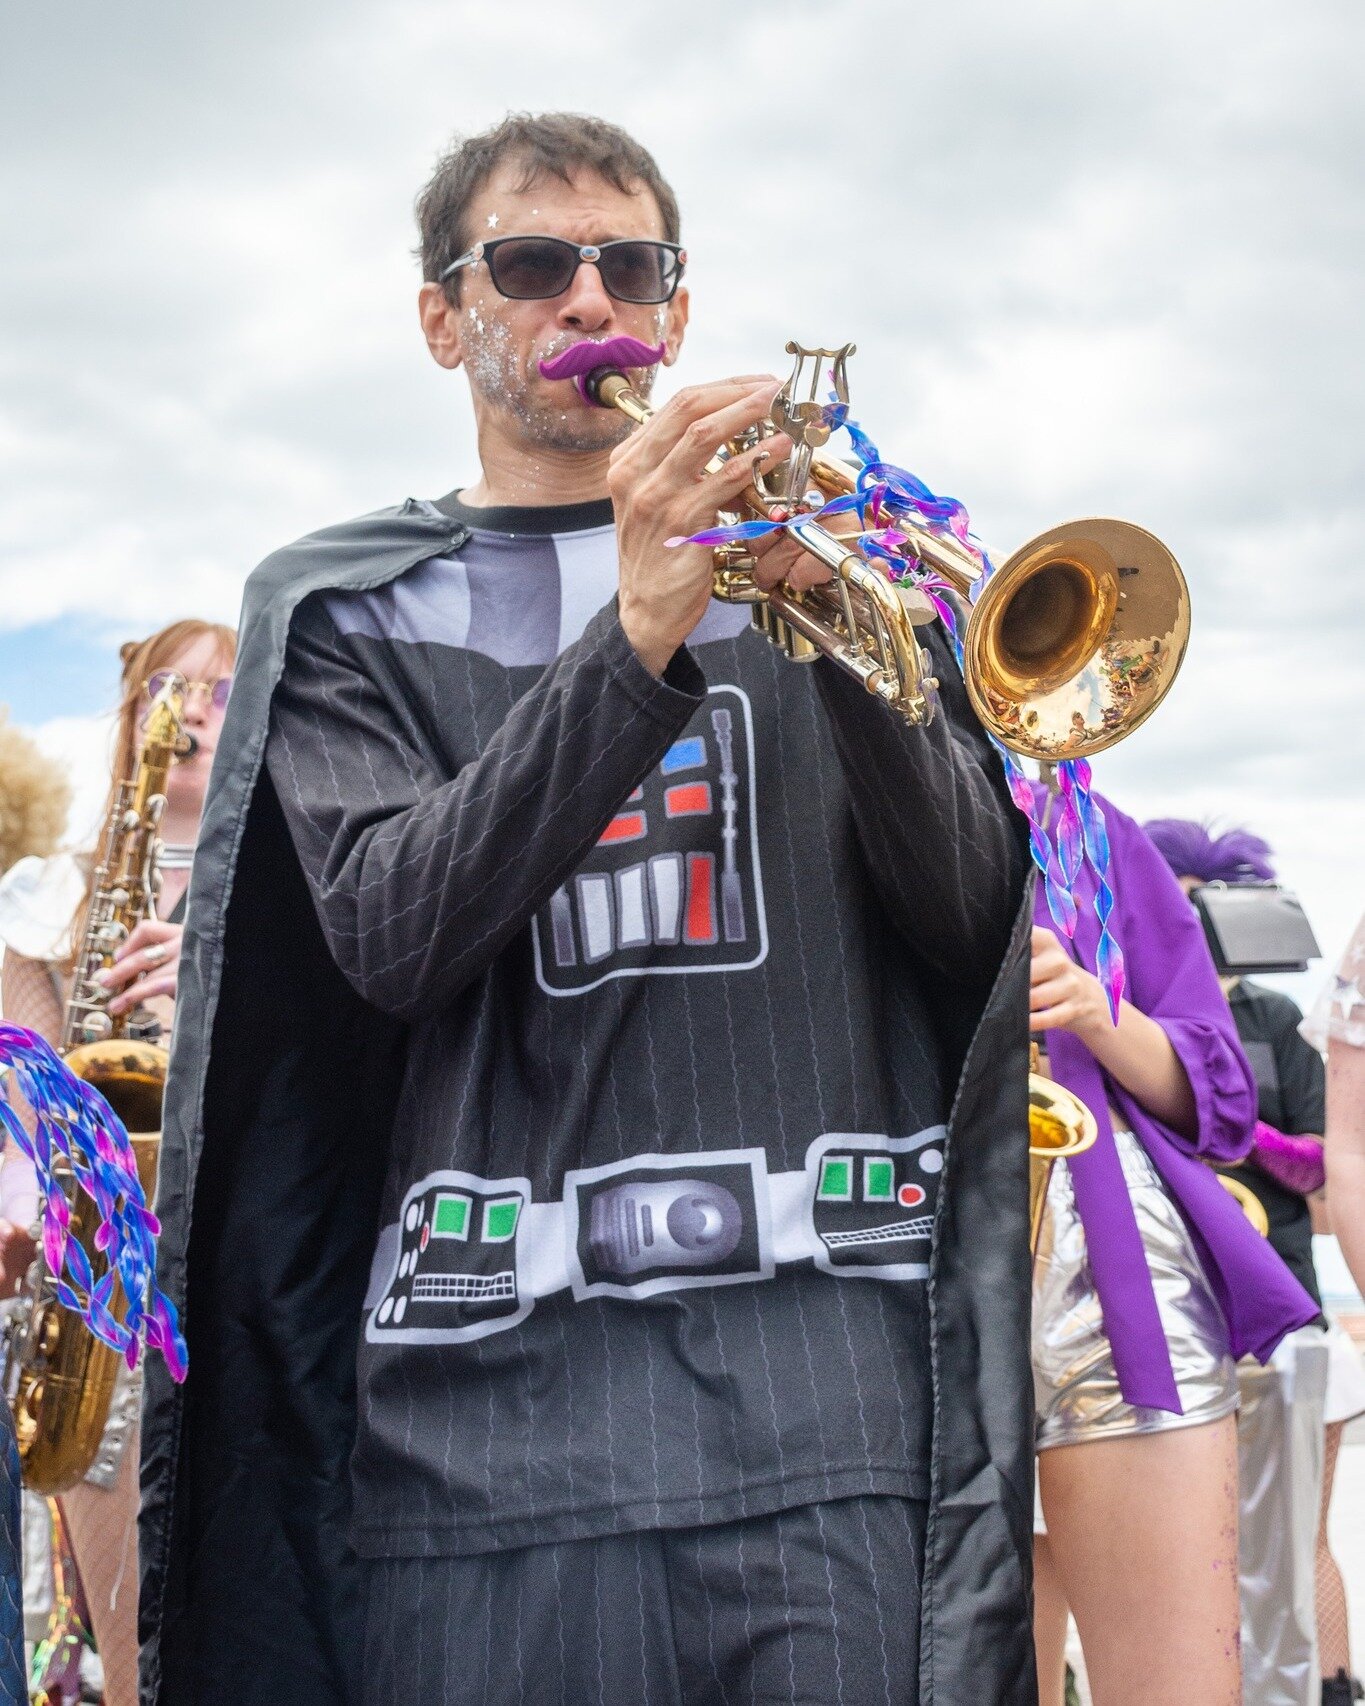 May the 4th be with you! #StarWarsDay 

#MayTheFourth #maythe4th #MayThe4thBeWithYou #maytheforcebewithyou #maythefourthbewithyou #maythe #BrassLove #meetup #brassband #horns #trumpet
#trombone #sax #saxophone #euphonium #tuba
#drumline #music #brook